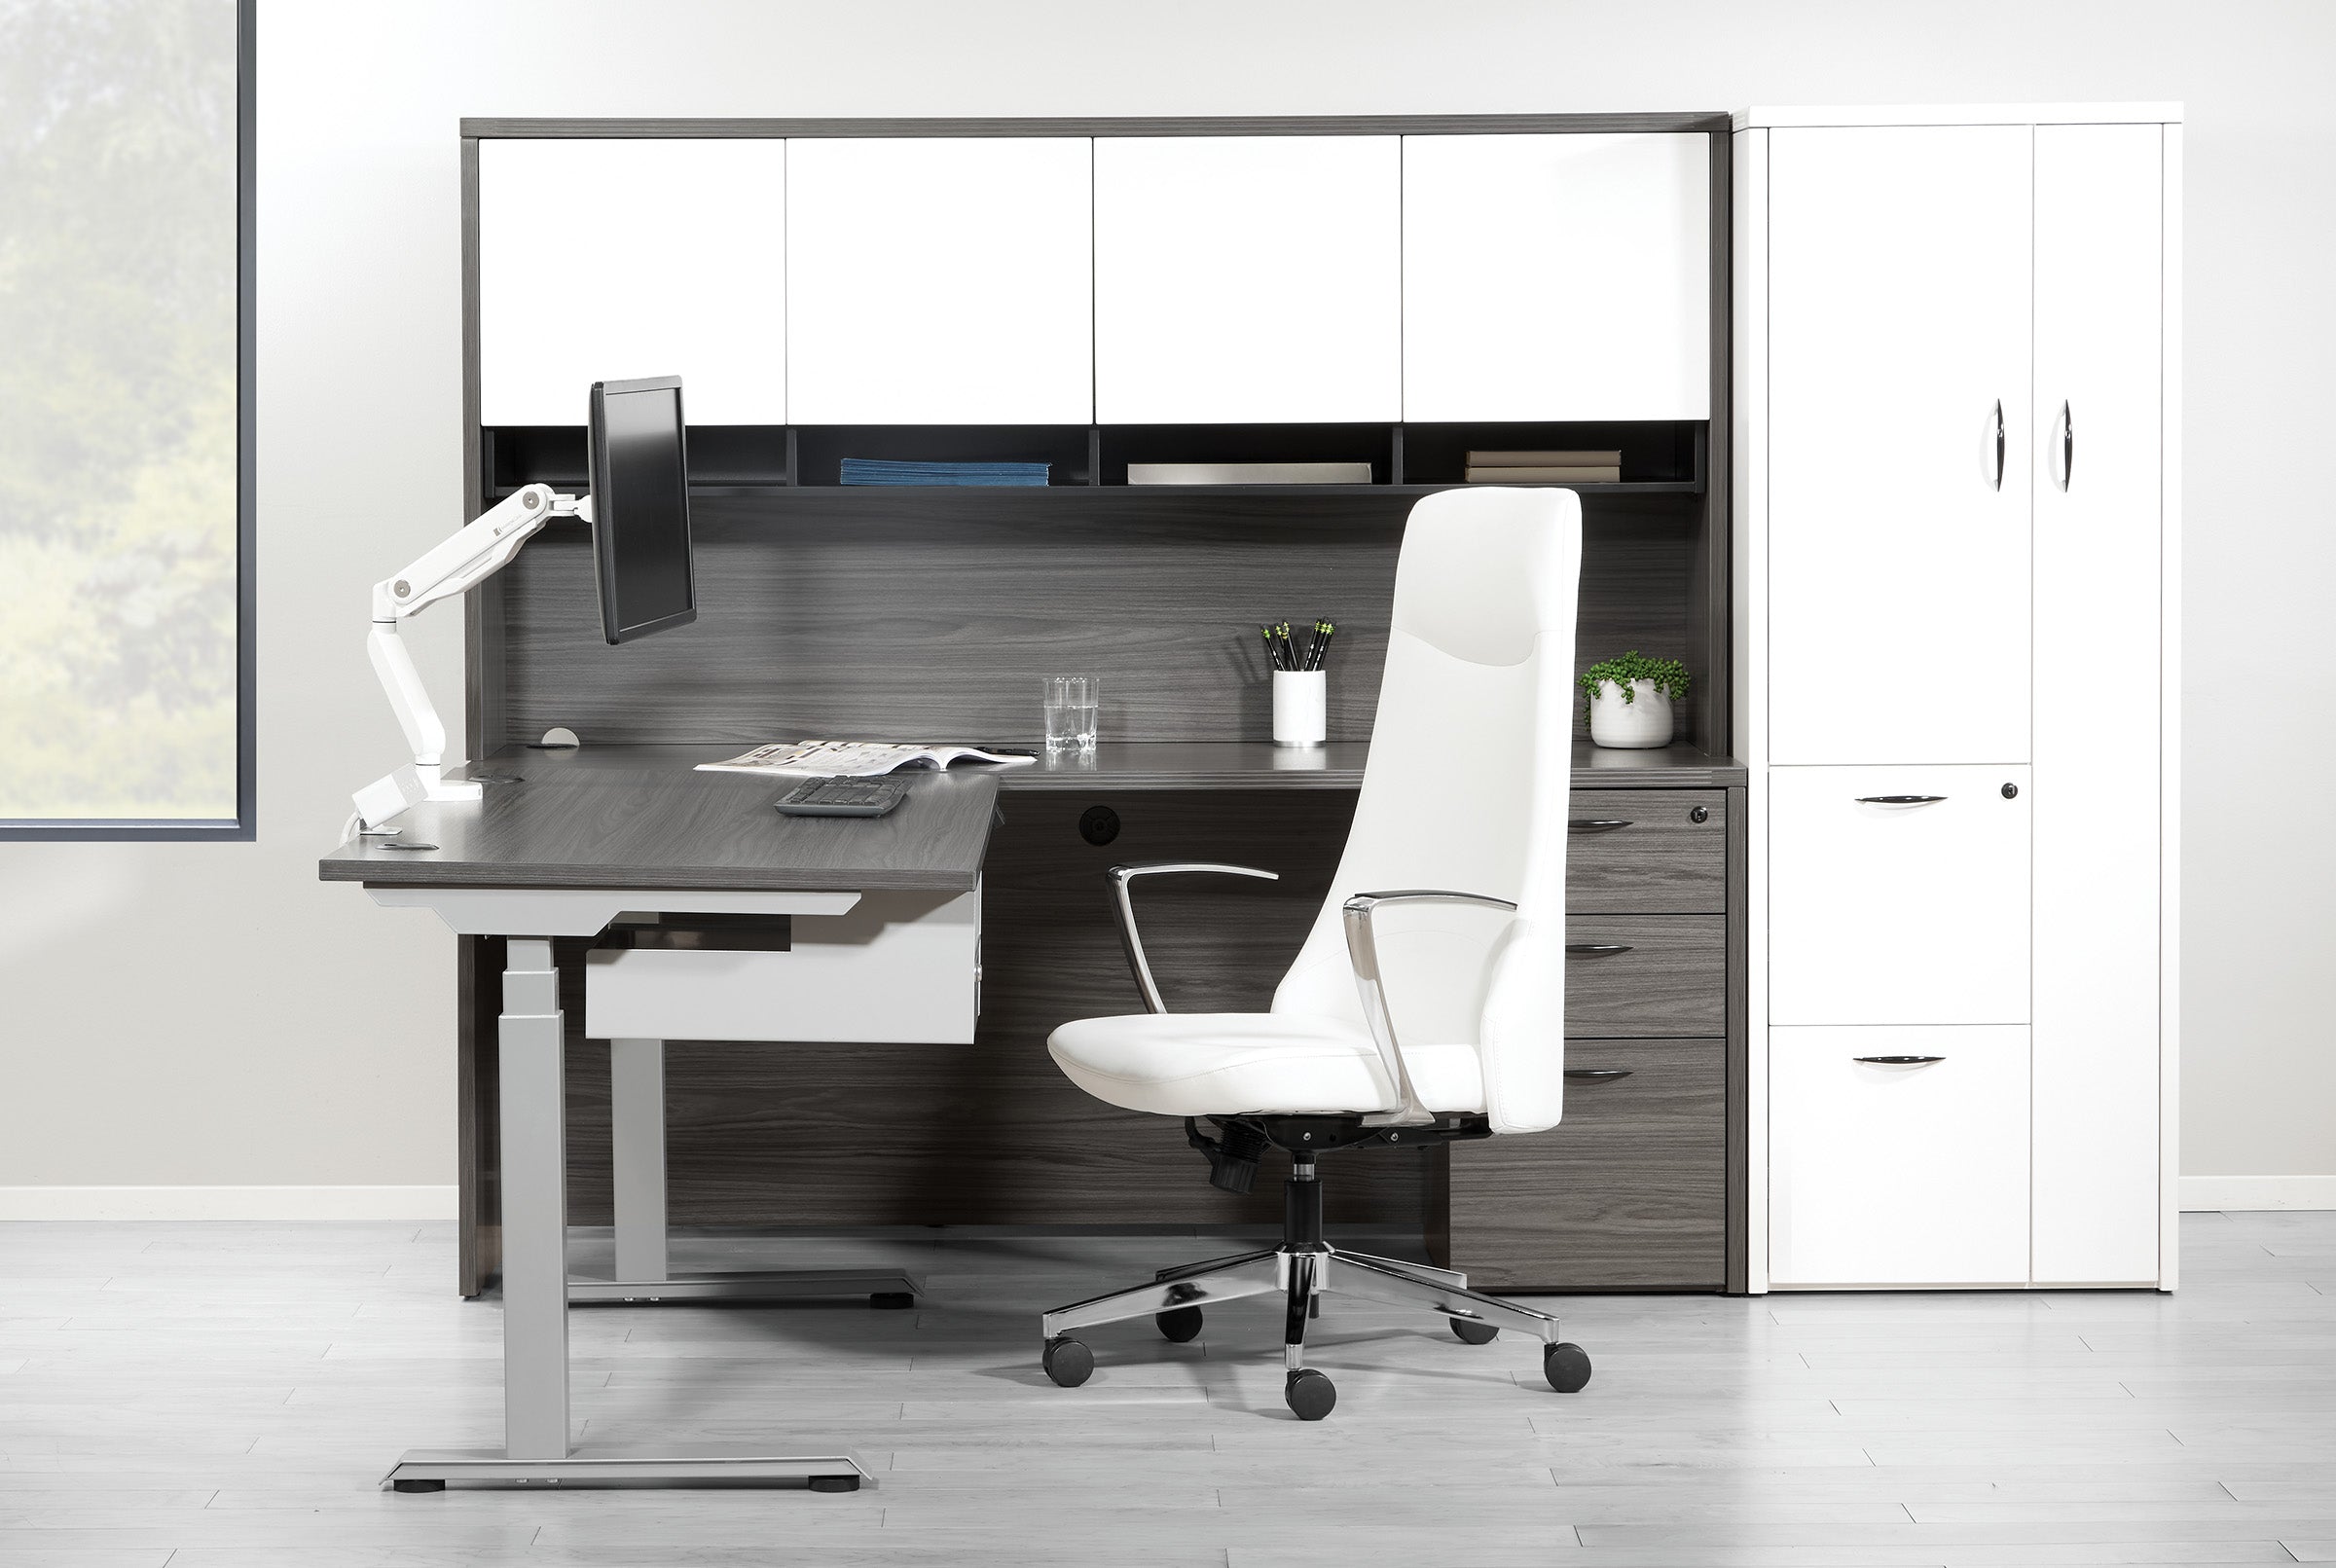 NAP-TTS1 - Two Tone Napa Series Office Suite with Height Adjustable Desk by OSP